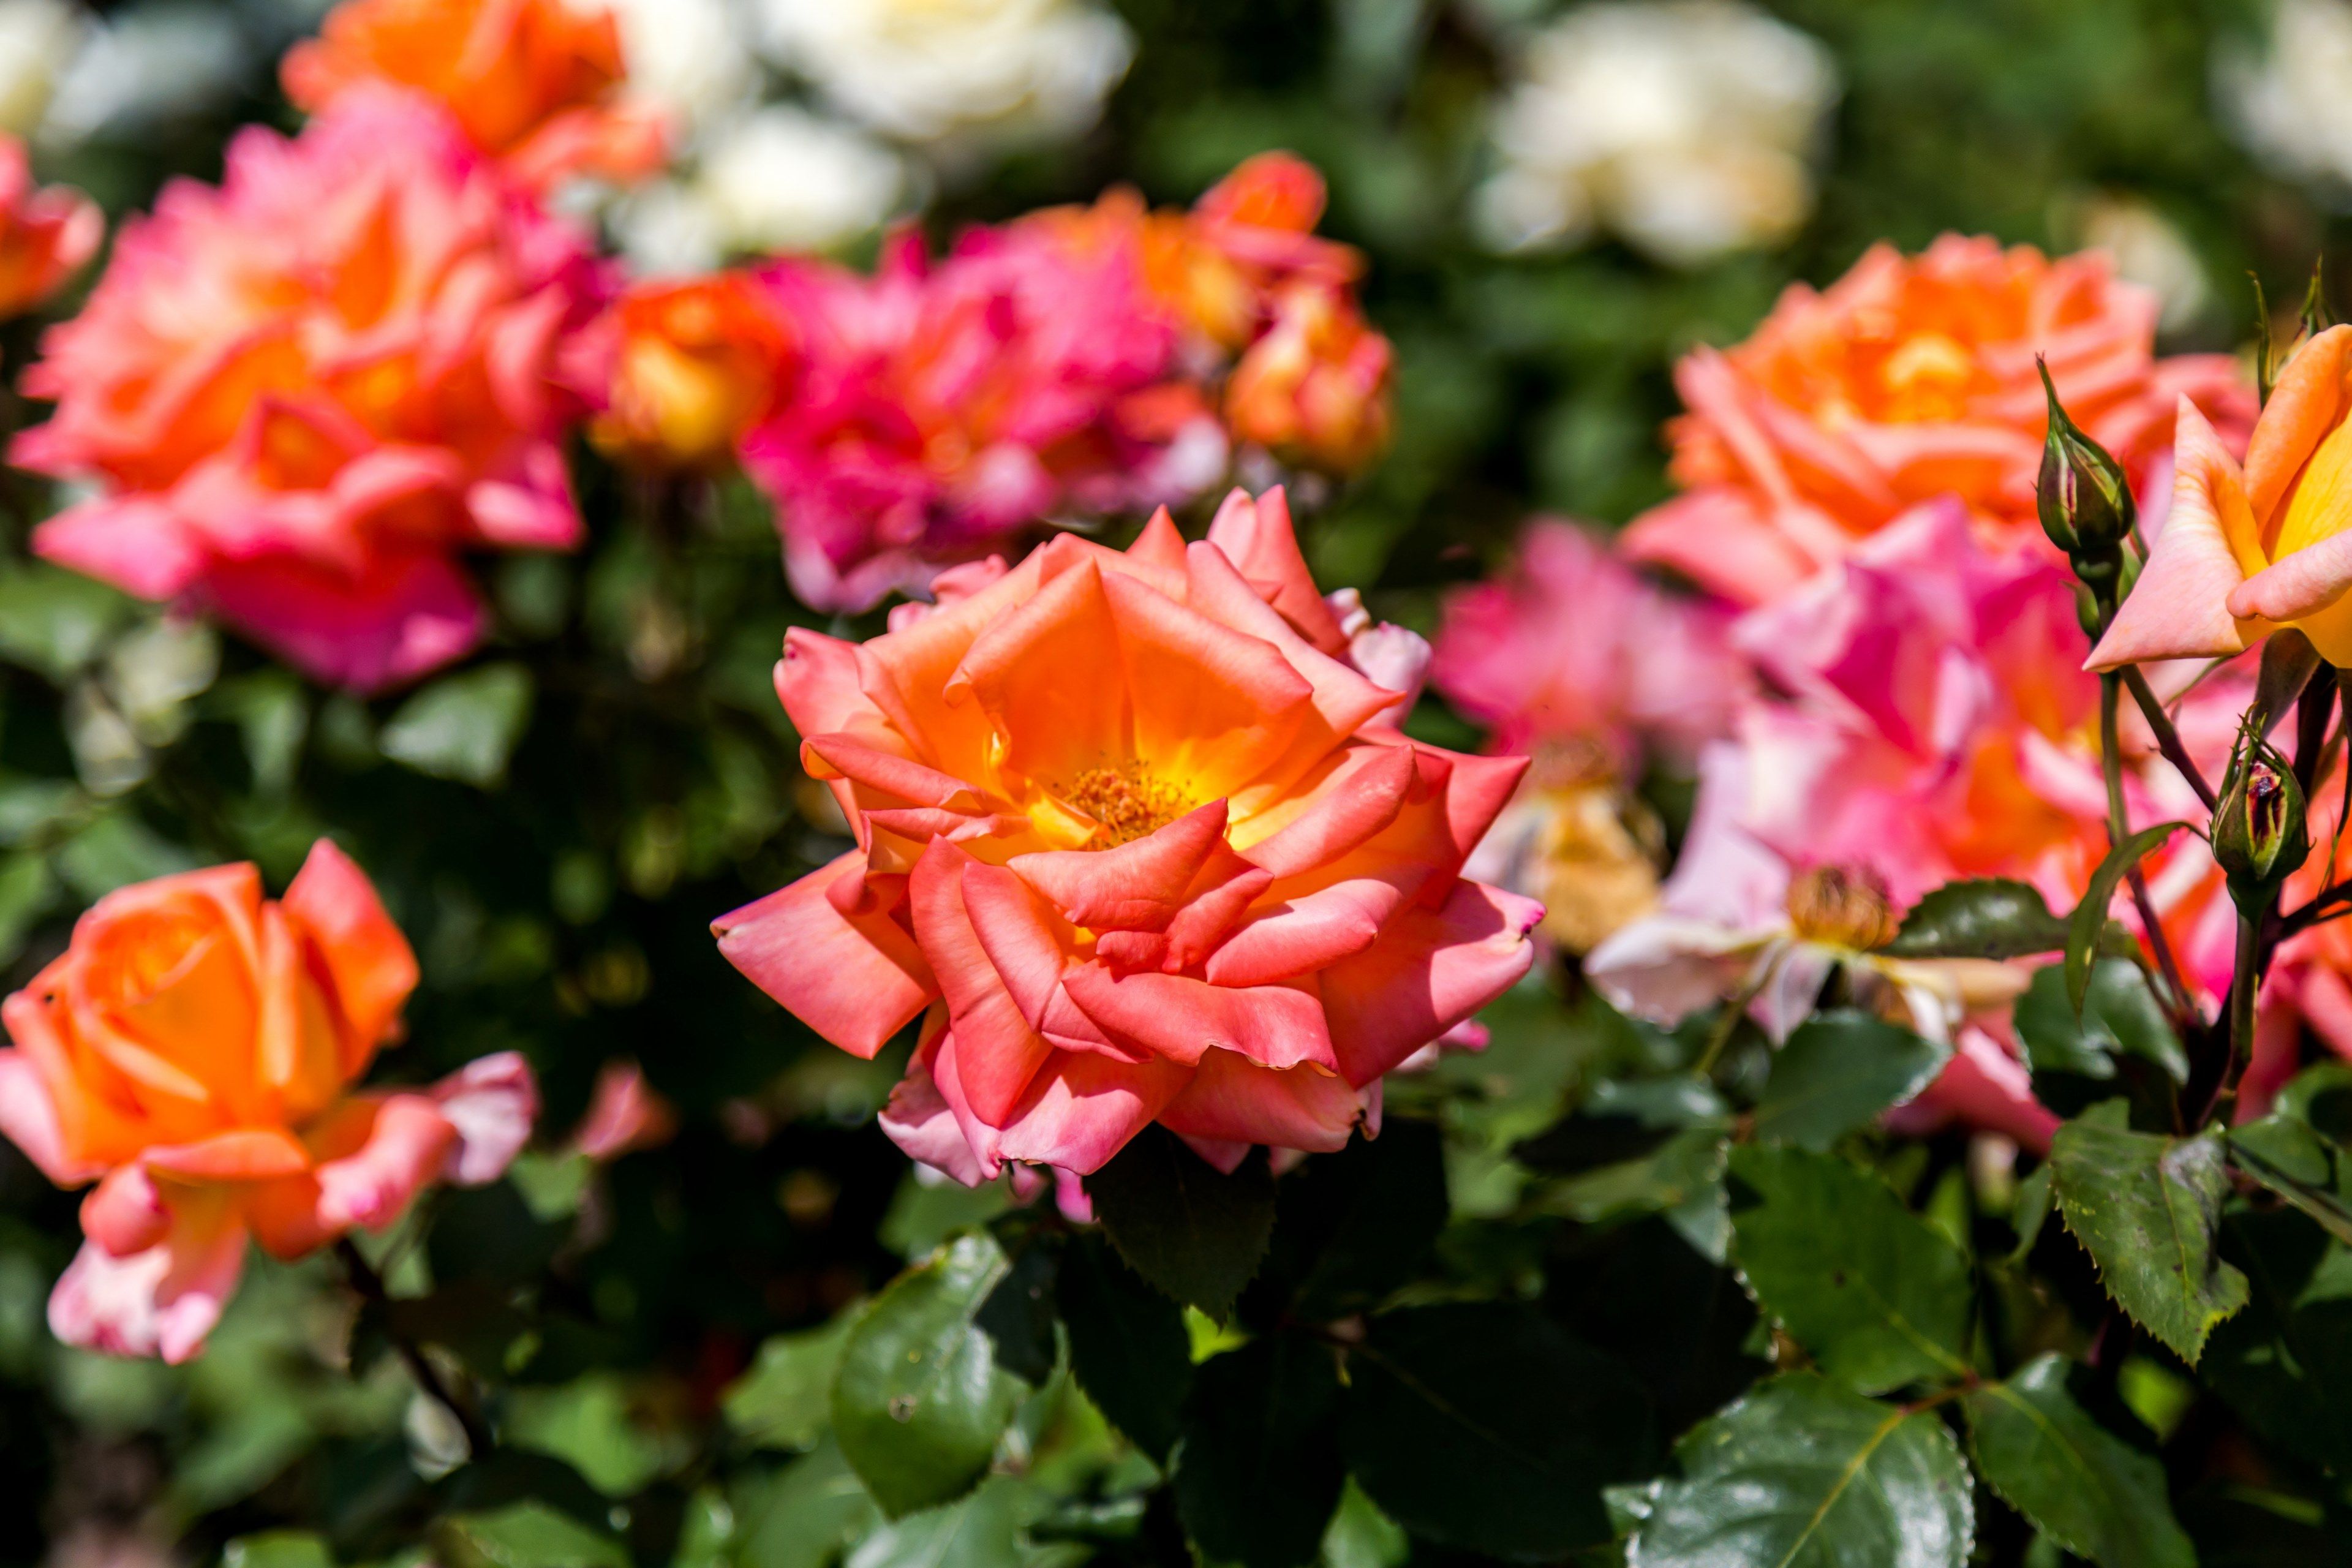 Wallpaper / orange and pink roses blossoming in a